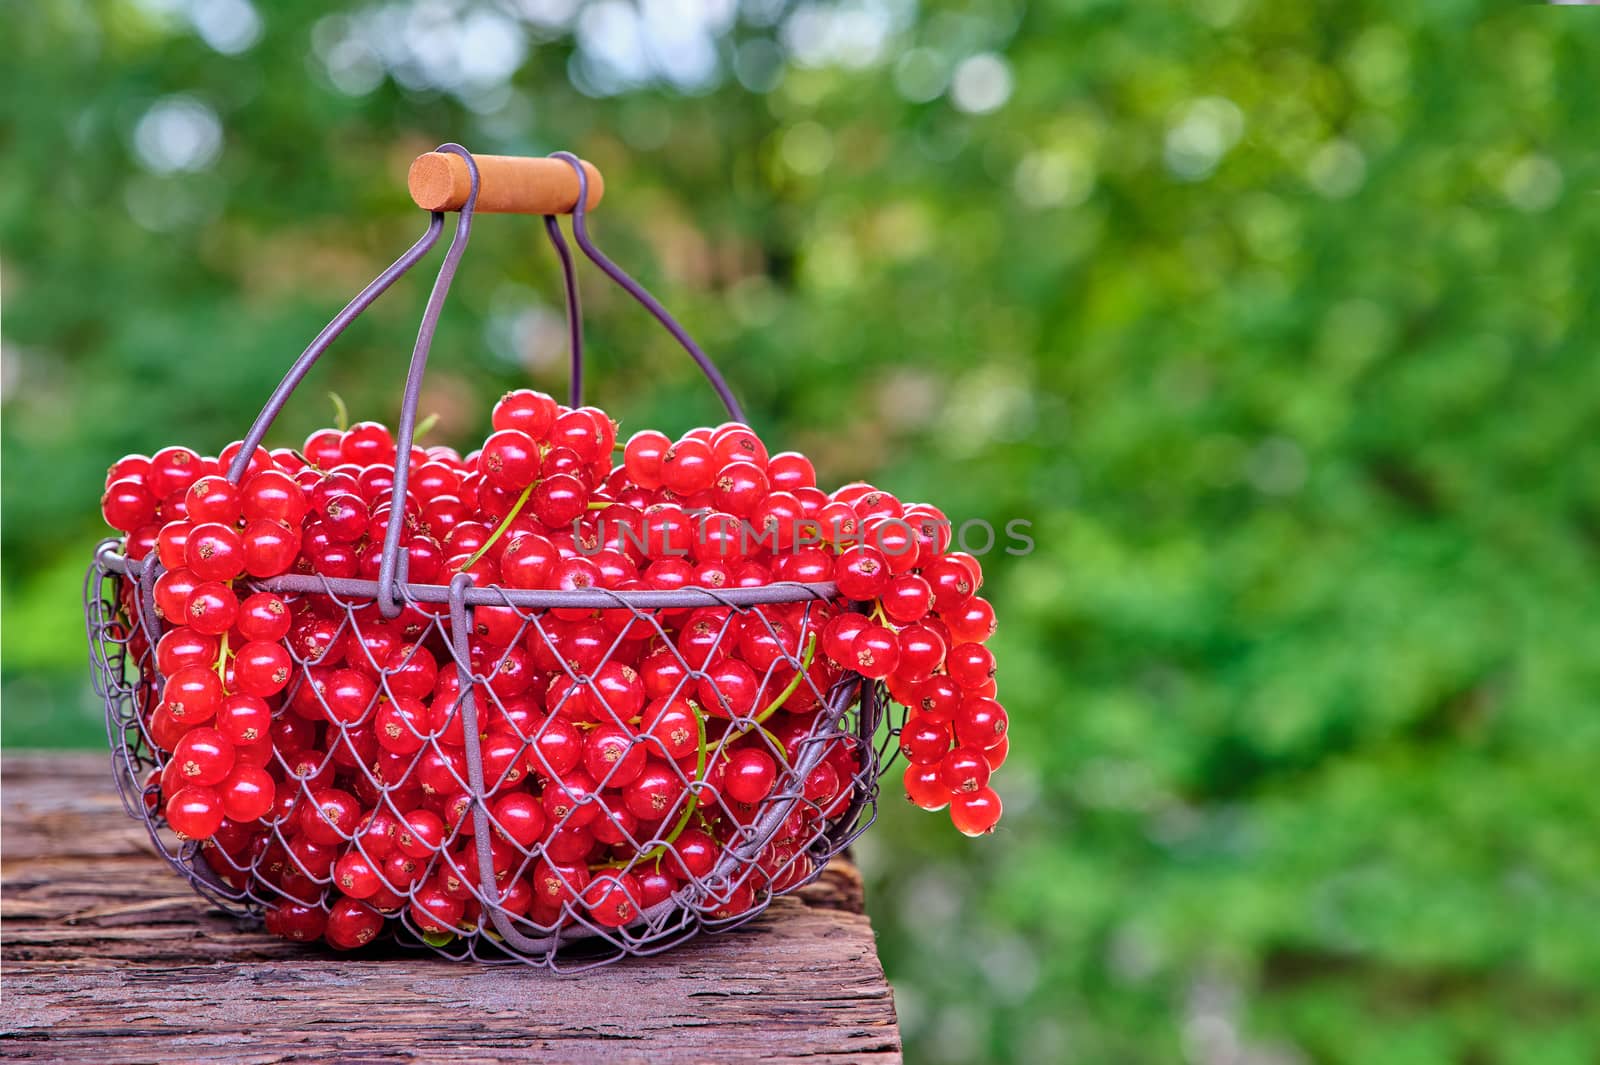 Red currant in a metal basket, backside background of green leaves by Fischeron